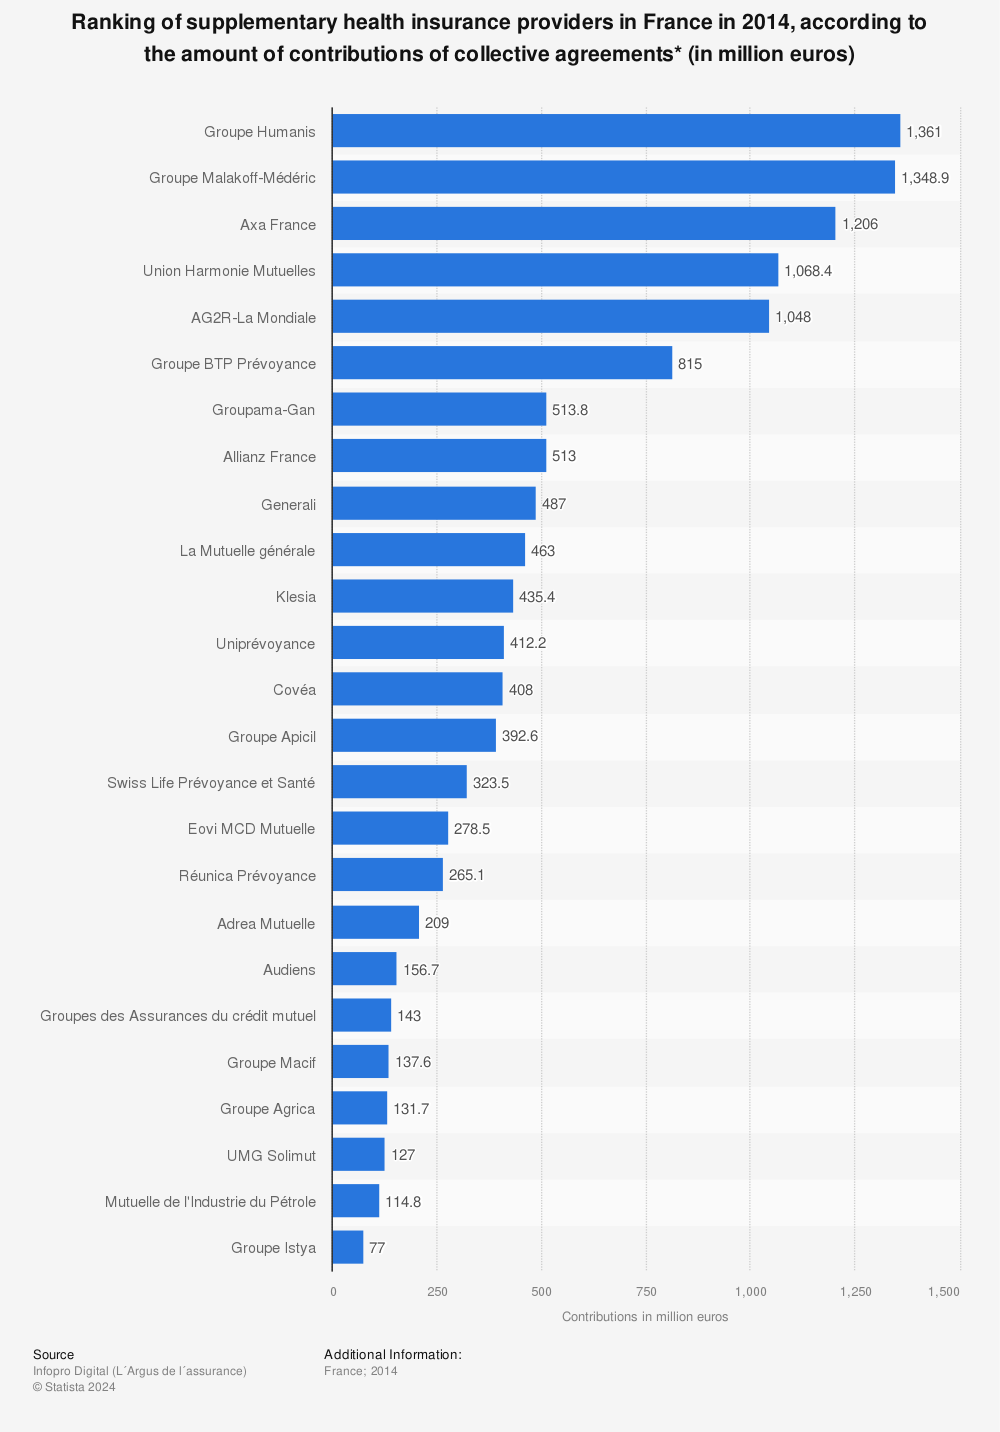 Statistic: Ranking of supplementary health insurance providers in France in 2014, according to the amount of contributions of collective agreements* (in million euros) | Statista